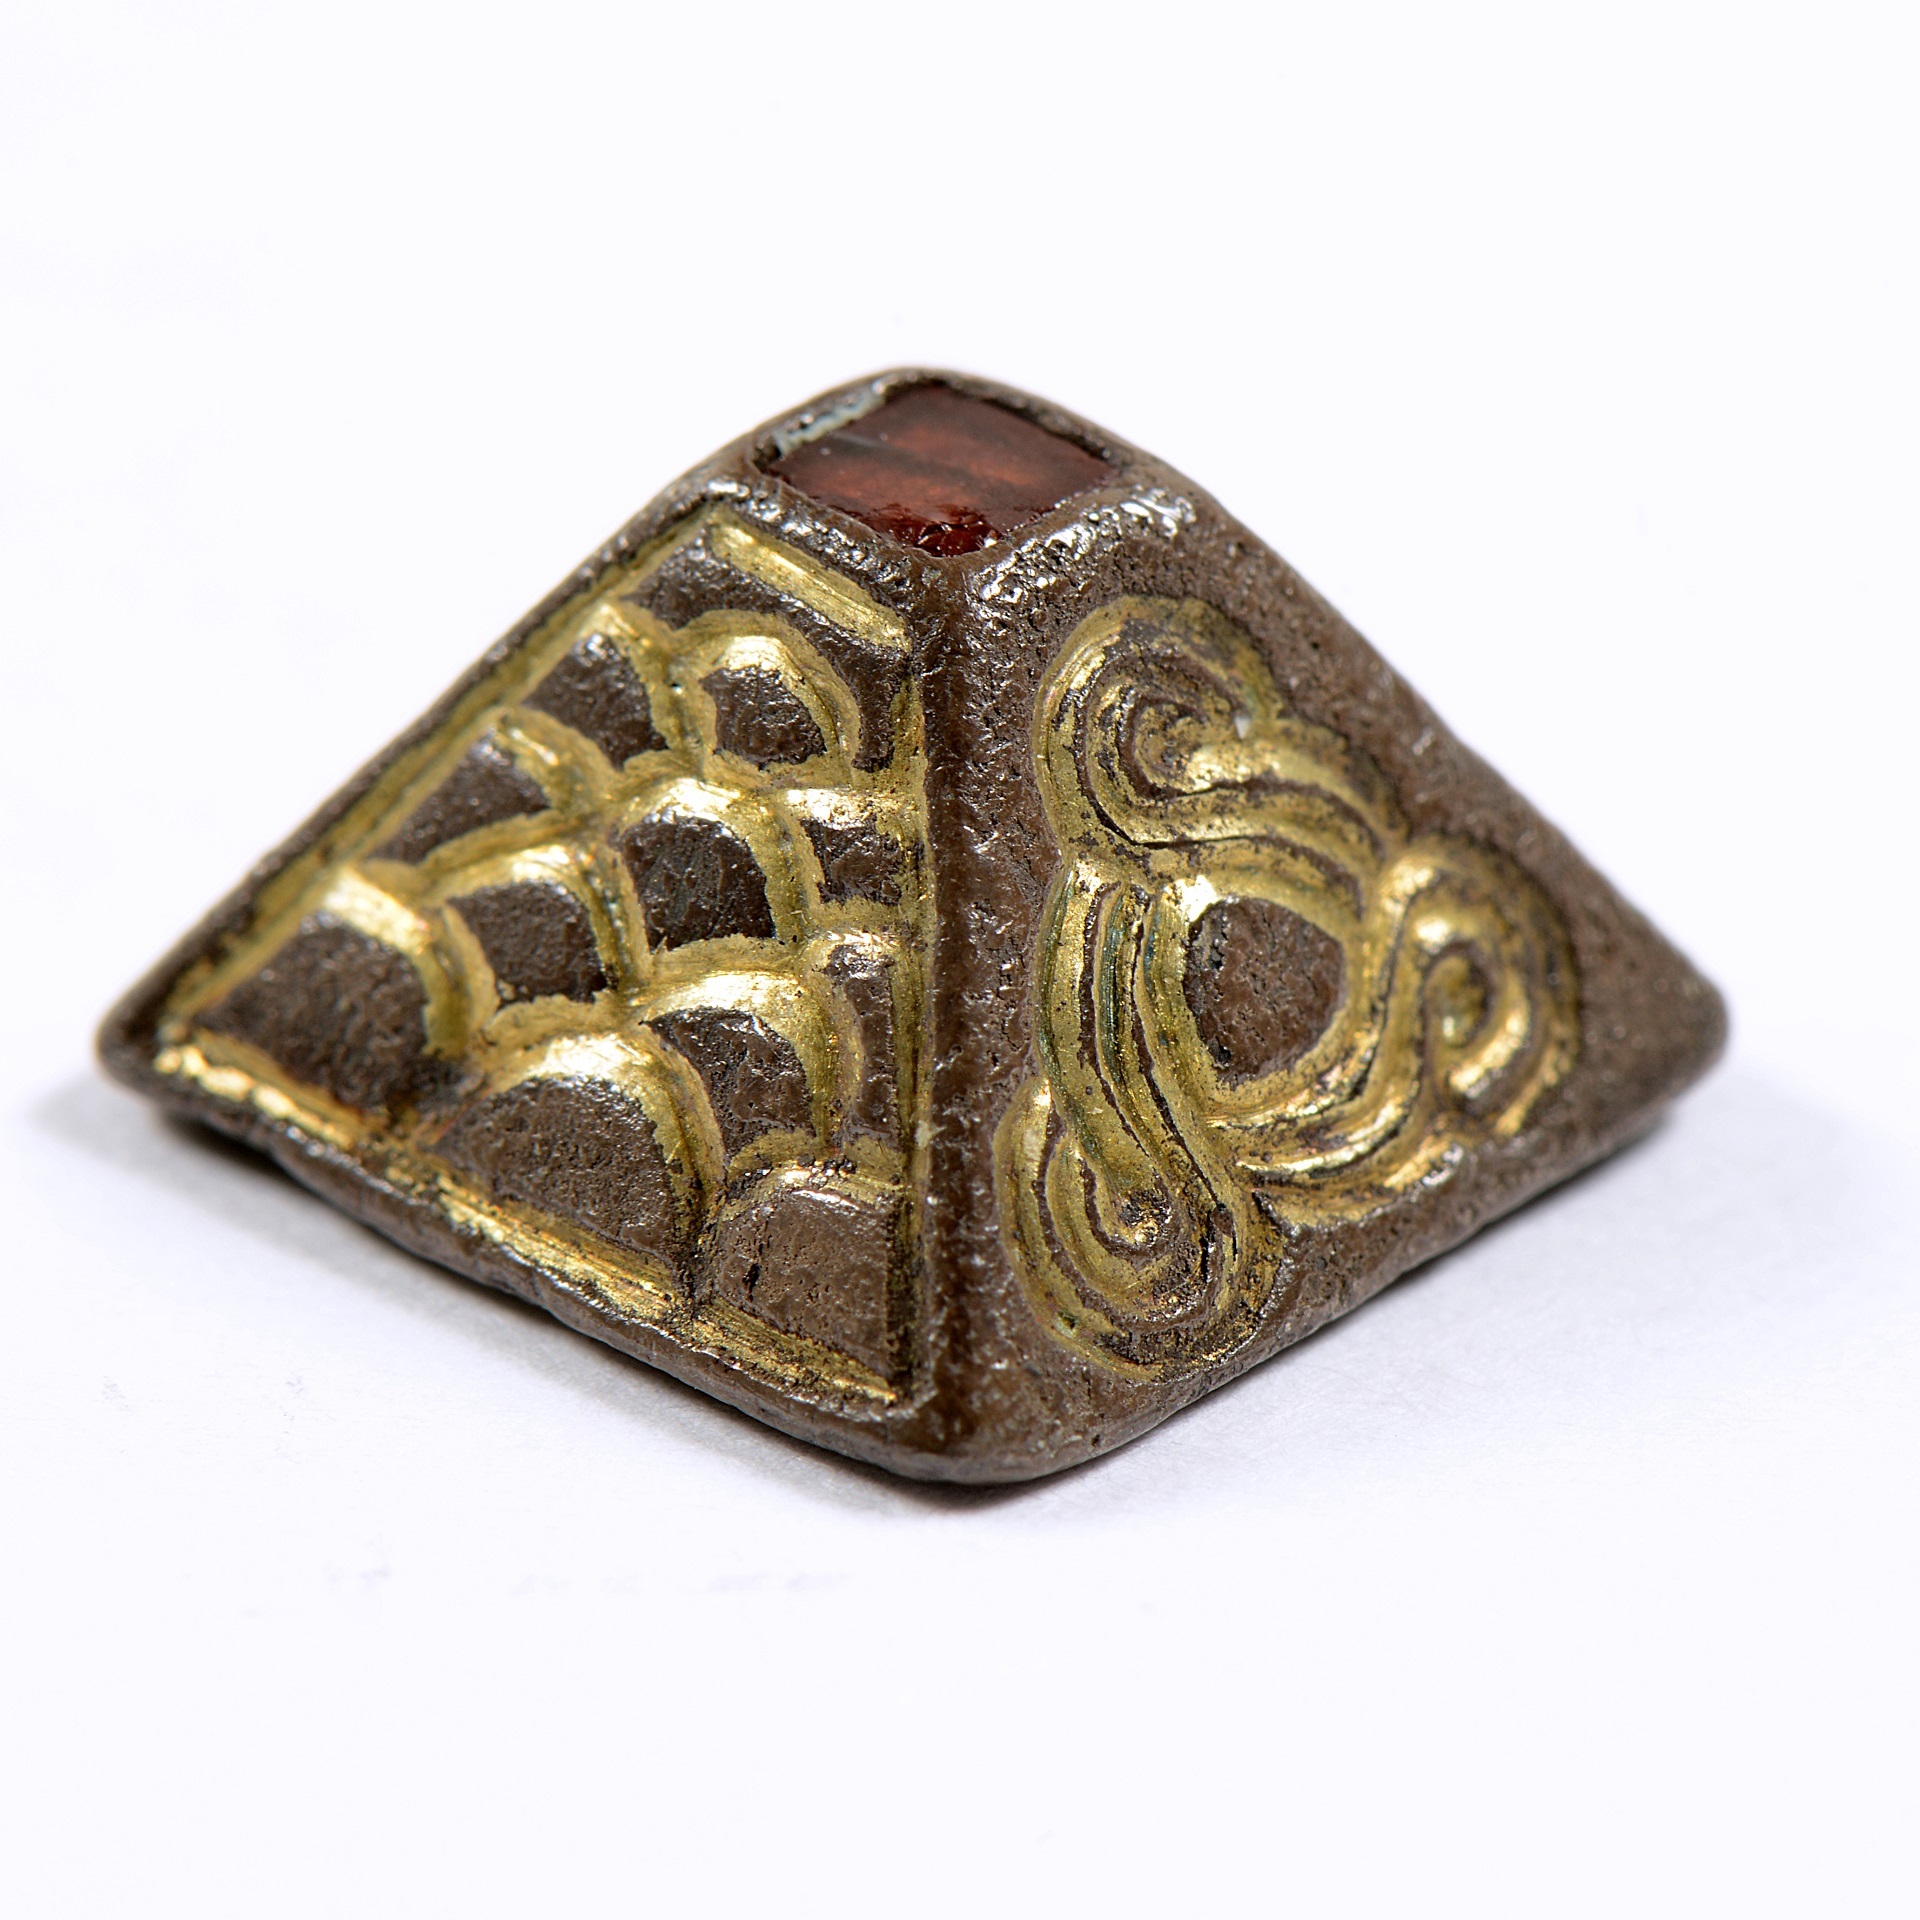 A silver Anglo-Saxon pyramid mount, inlaid with a single garnet and with gold decoration on white background.